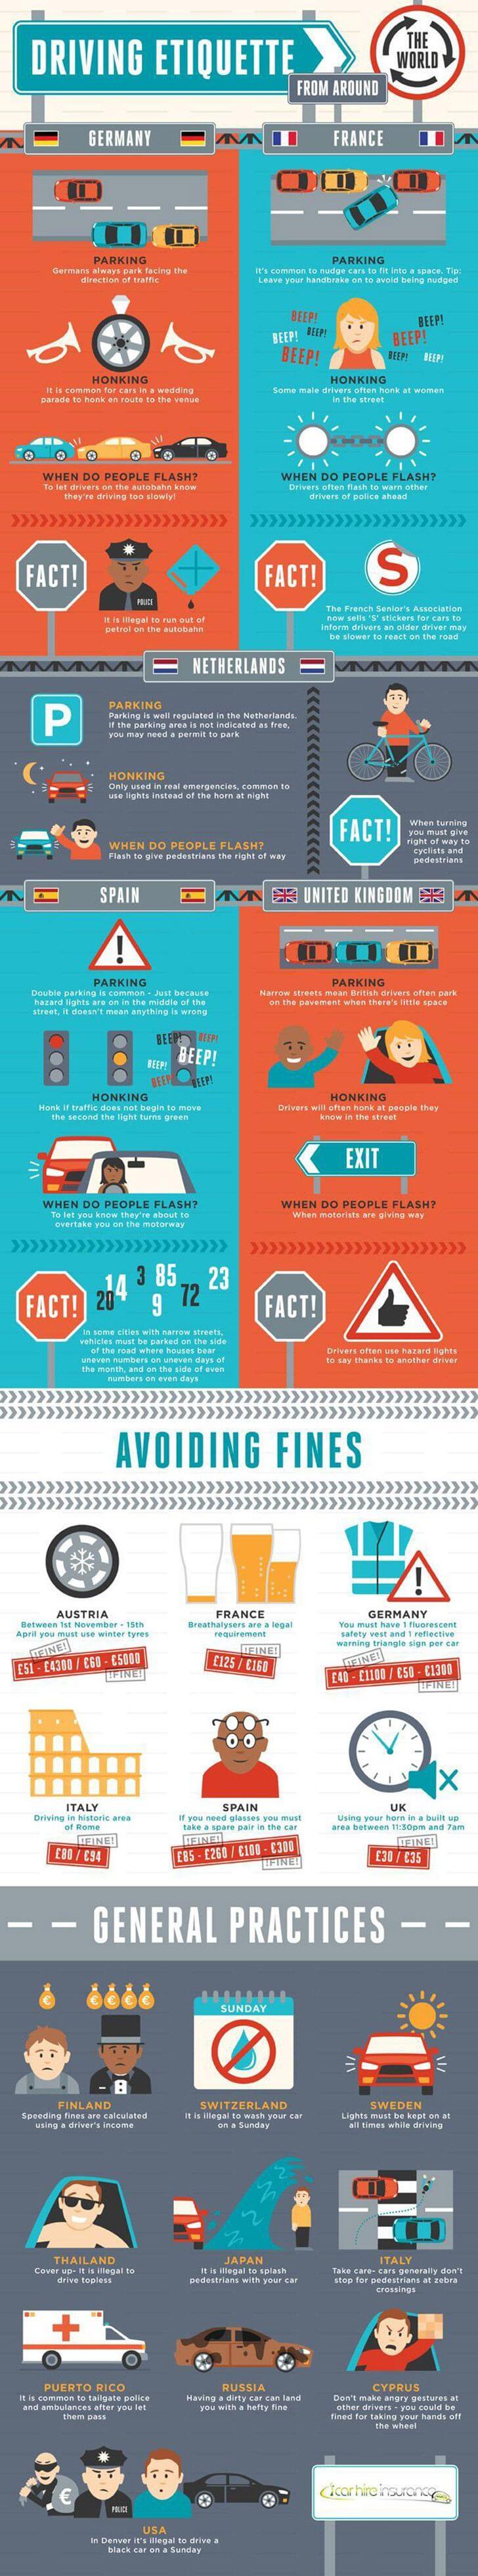 Driving Rules Around the World: A Global Guide to Road Etiquette